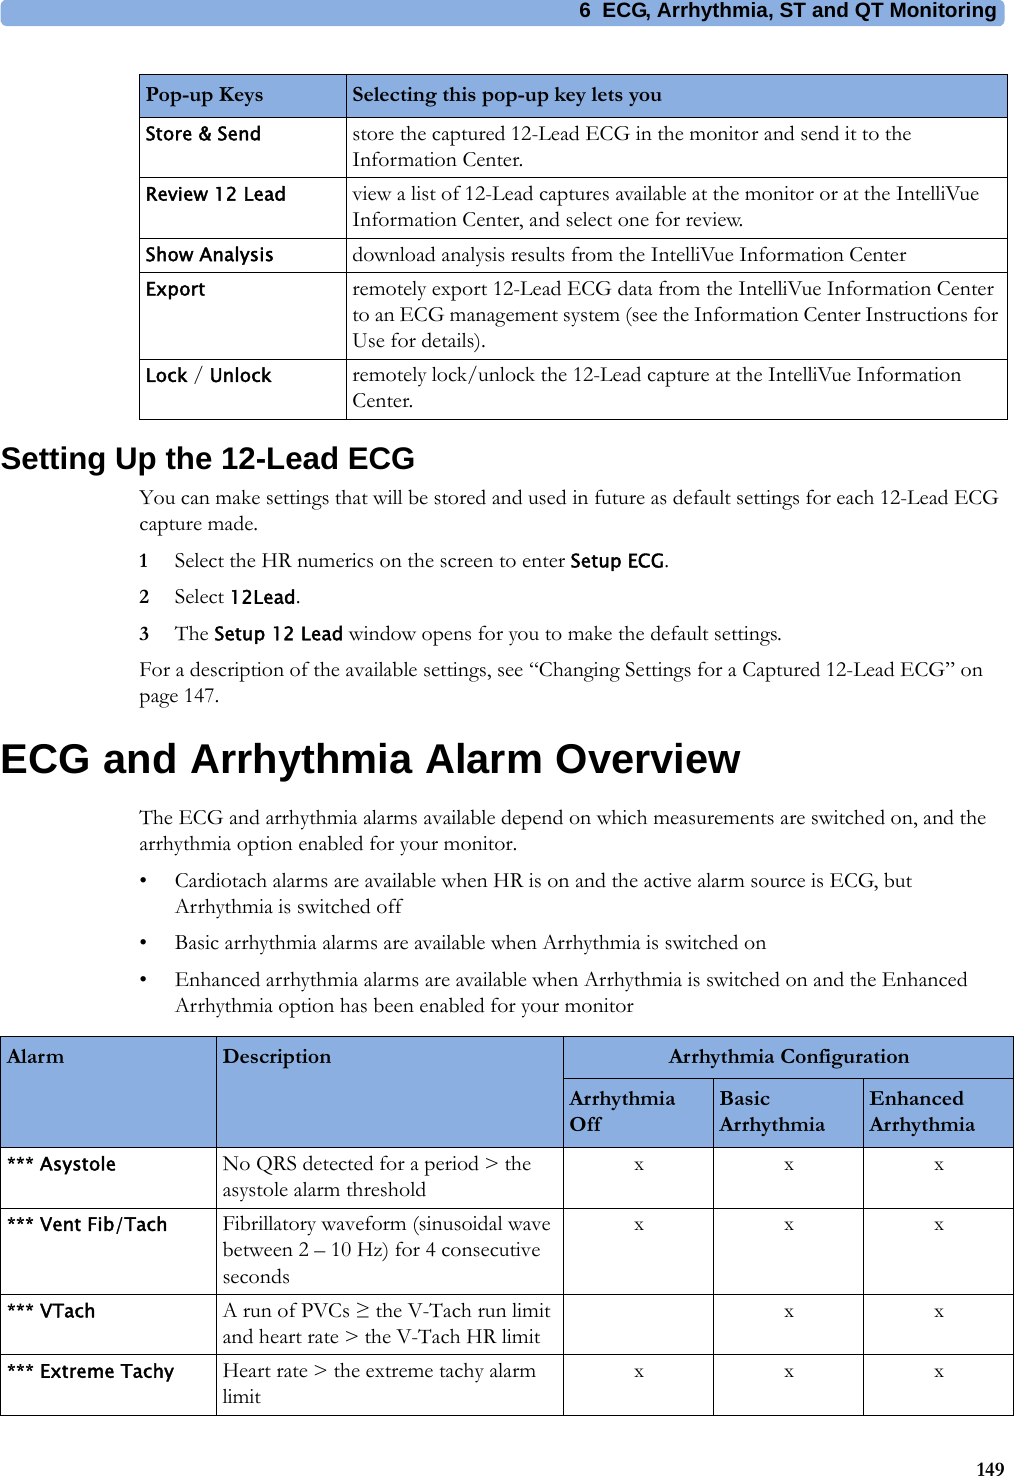 6 ECG, Arrhythmia, ST and QT Monitoring149Setting Up the 12-Lead ECGYou can make settings that will be stored and used in future as default settings for each 12-Lead ECG capture made.1Select the HR numerics on the screen to enter Setup ECG.2Select 12Lead.3The Setup 12 Lead window opens for you to make the default settings.For a description of the available settings, see “Changing Settings for a Captured 12-Lead ECG” on page 147.ECG and Arrhythmia Alarm OverviewThe ECG and arrhythmia alarms available depend on which measurements are switched on, and the arrhythmia option enabled for your monitor.• Cardiotach alarms are available when HR is on and the active alarm source is ECG, but Arrhythmia is switched off• Basic arrhythmia alarms are available when Arrhythmia is switched on• Enhanced arrhythmia alarms are available when Arrhythmia is switched on and the Enhanced Arrhythmia option has been enabled for your monitorStore &amp; Send store the captured 12-Lead ECG in the monitor and send it to the Information Center.Review 12 Lead view a list of 12-Lead captures available at the monitor or at the IntelliVue Information Center, and select one for review.Show Analysis download analysis results from the IntelliVue Information CenterExport remotely export 12-Lead ECG data from the IntelliVue Information Center to an ECG management system (see the Information Center Instructions for Use for details).Lock / Unlock remotely lock/unlock the 12-Lead capture at the IntelliVue Information Center.Pop-up Keys Selecting this pop-up key lets youAlarm Description Arrhythmia ConfigurationArrhythmia OffBasic ArrhythmiaEnhanced Arrhythmia*** Asystole No QRS detected for a period &gt; the asystole alarm thresholdxxx*** Vent Fib/Tach Fibrillatory waveform (sinusoidal wave between 2 – 10 Hz) for 4 consecutive secondsxxx*** VTach A run of PVCs ≥ the V-Tach run limit and heart rate &gt; the V-Tach HR limitxx*** Extreme Tachy Heart rate &gt; the extreme tachy alarm limitxxx